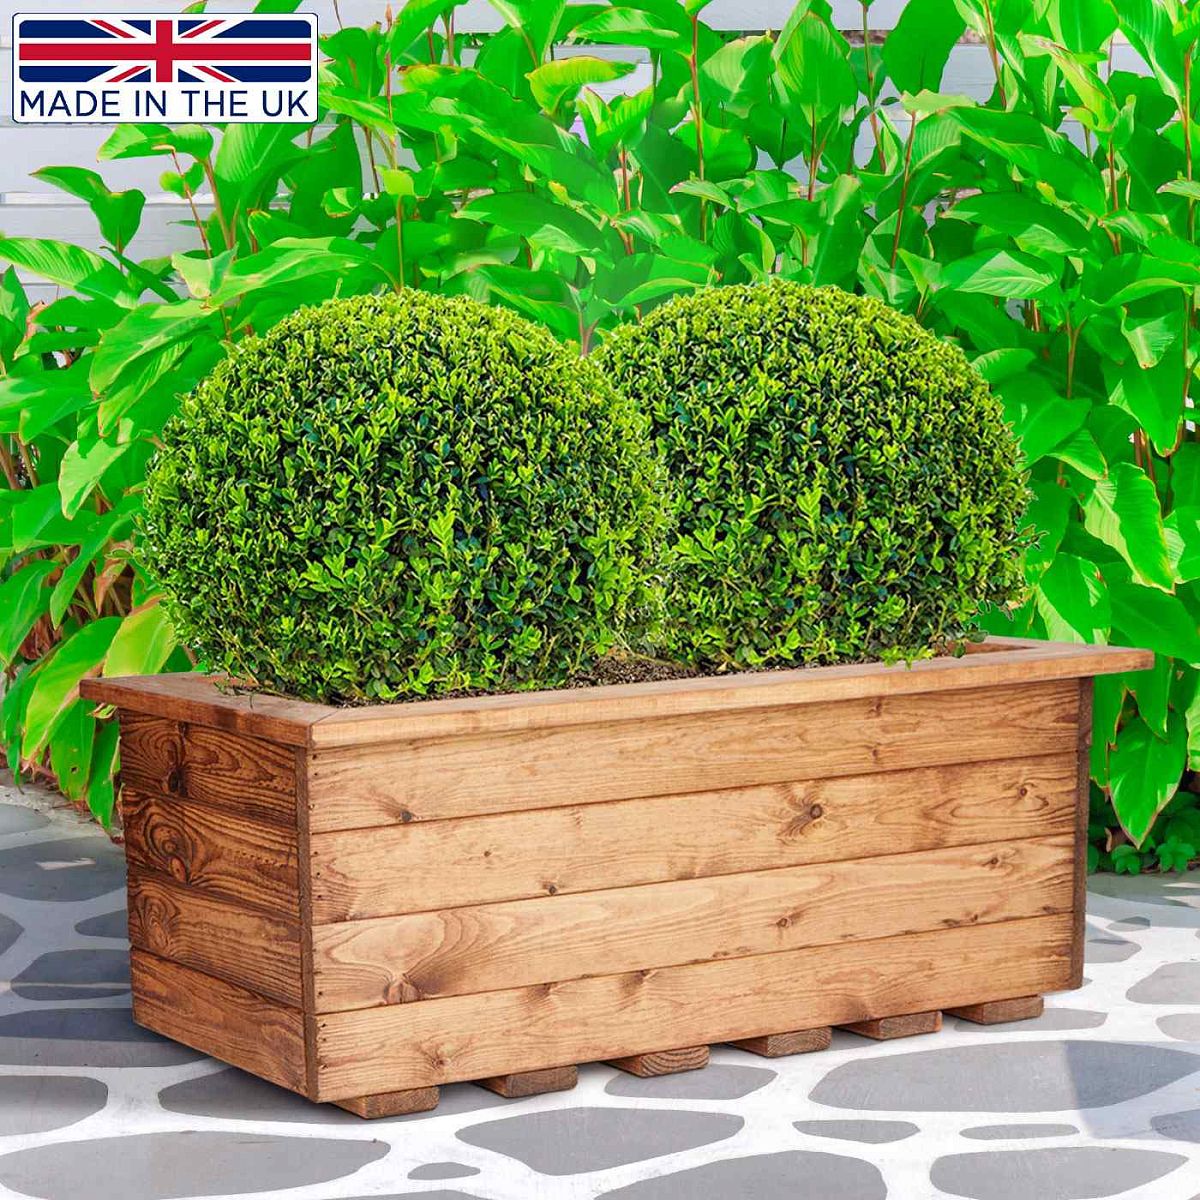 HORTICO Wood Planter Trough for Garden, Outdoor Plant Pot Rectangular Made of Redwood, L57 W33 H31 cm, 74L